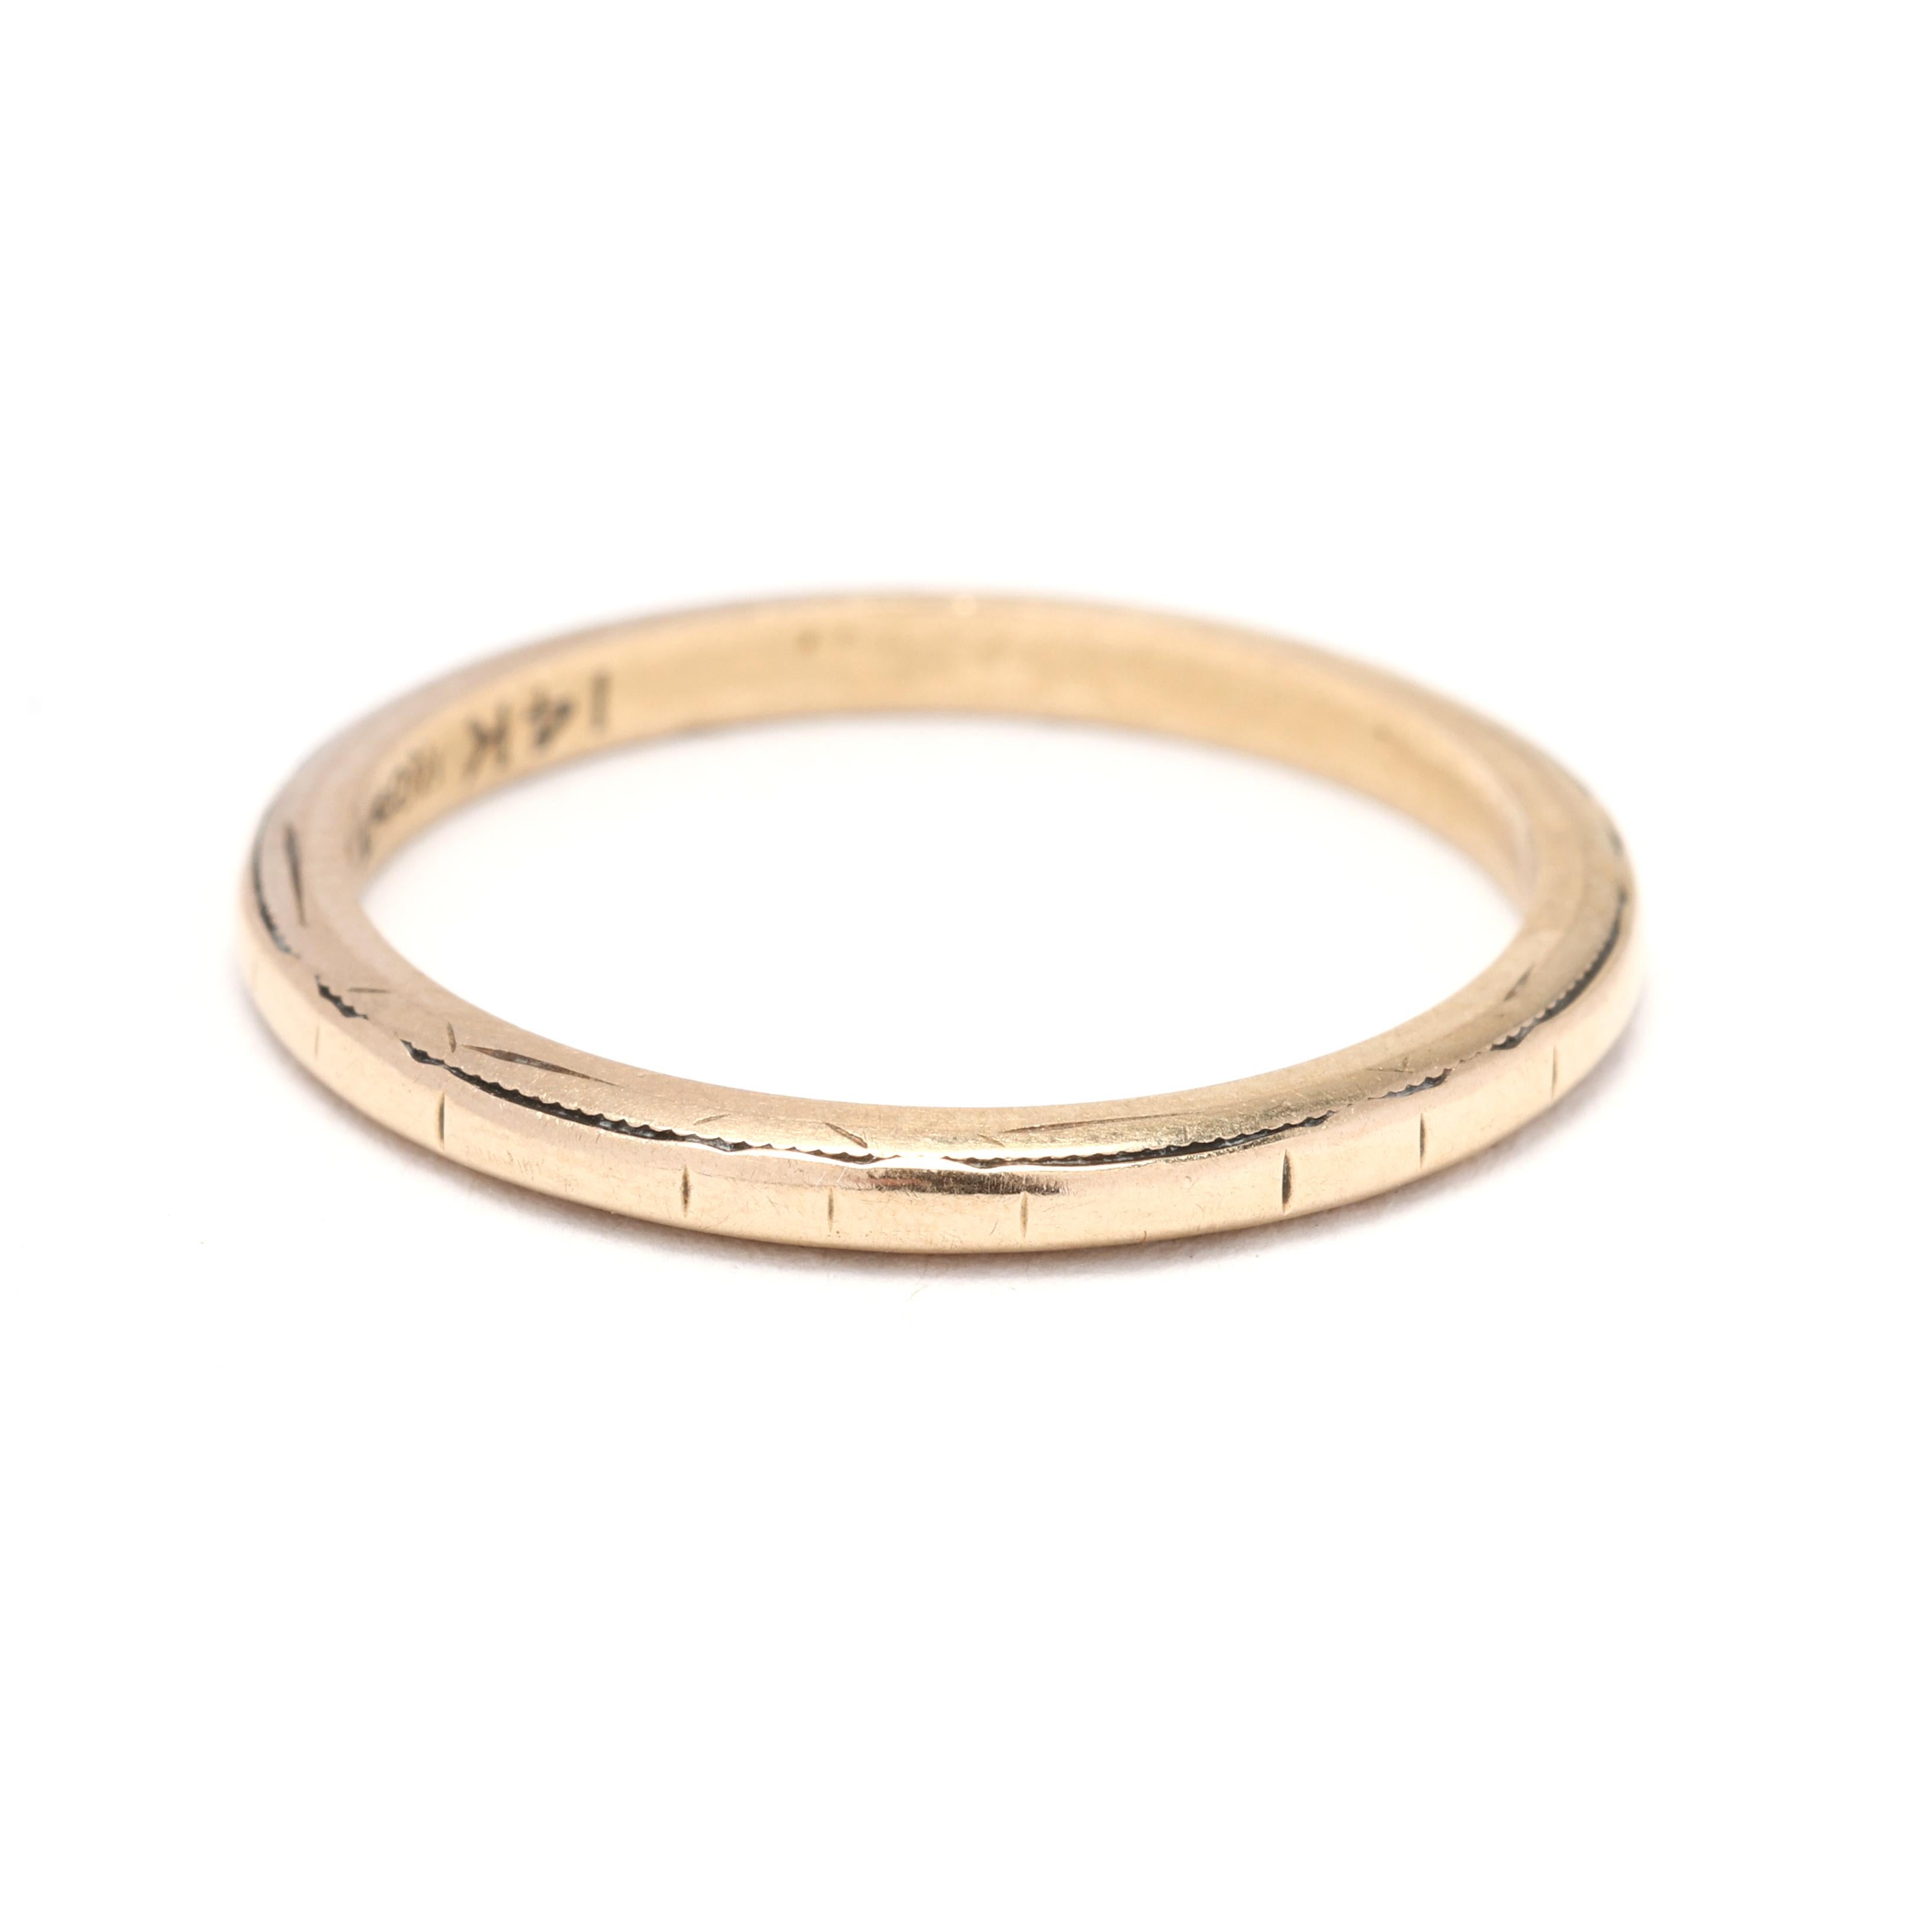 14K Yellow Gold Engraved Ring, Ring Size 4.75, Stackable, Wedding Band In Good Condition For Sale In McLeansville, NC